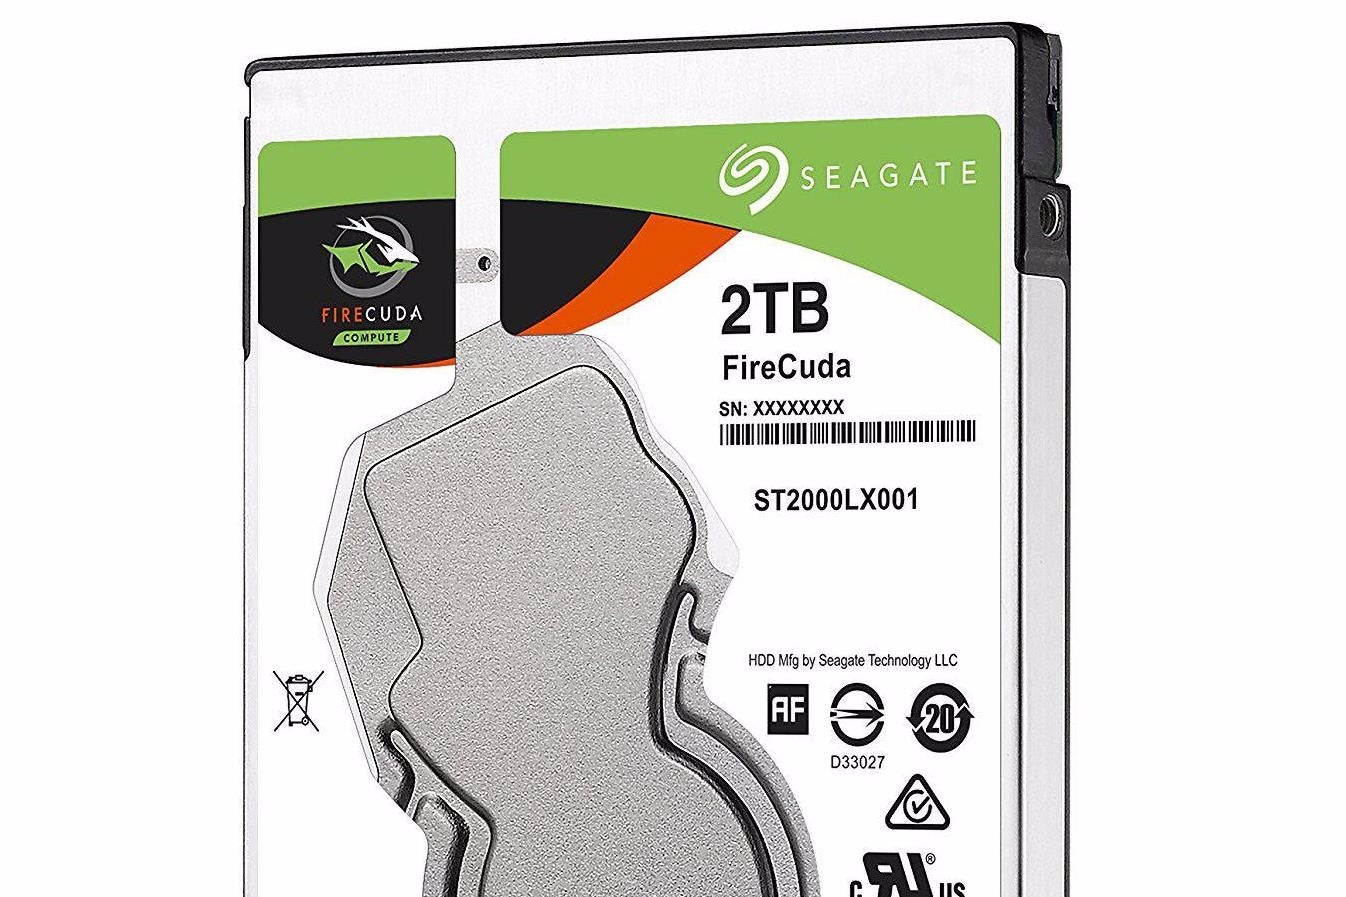 Seagate Firecuda 2TB review: the ultimate PS4 storage upgrade